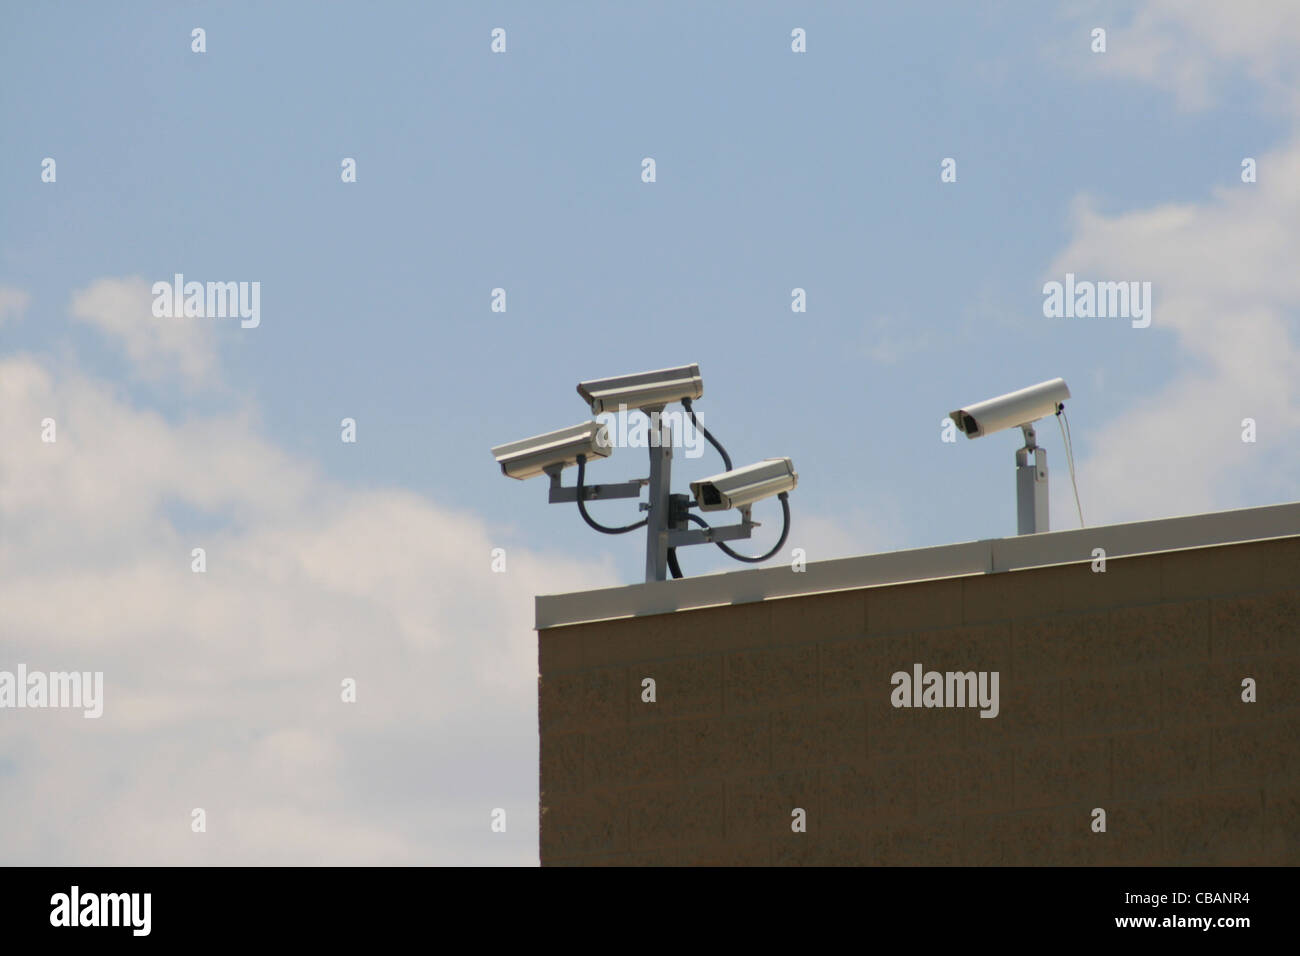 multiple security cameras record from the corner of a building Stock Photo